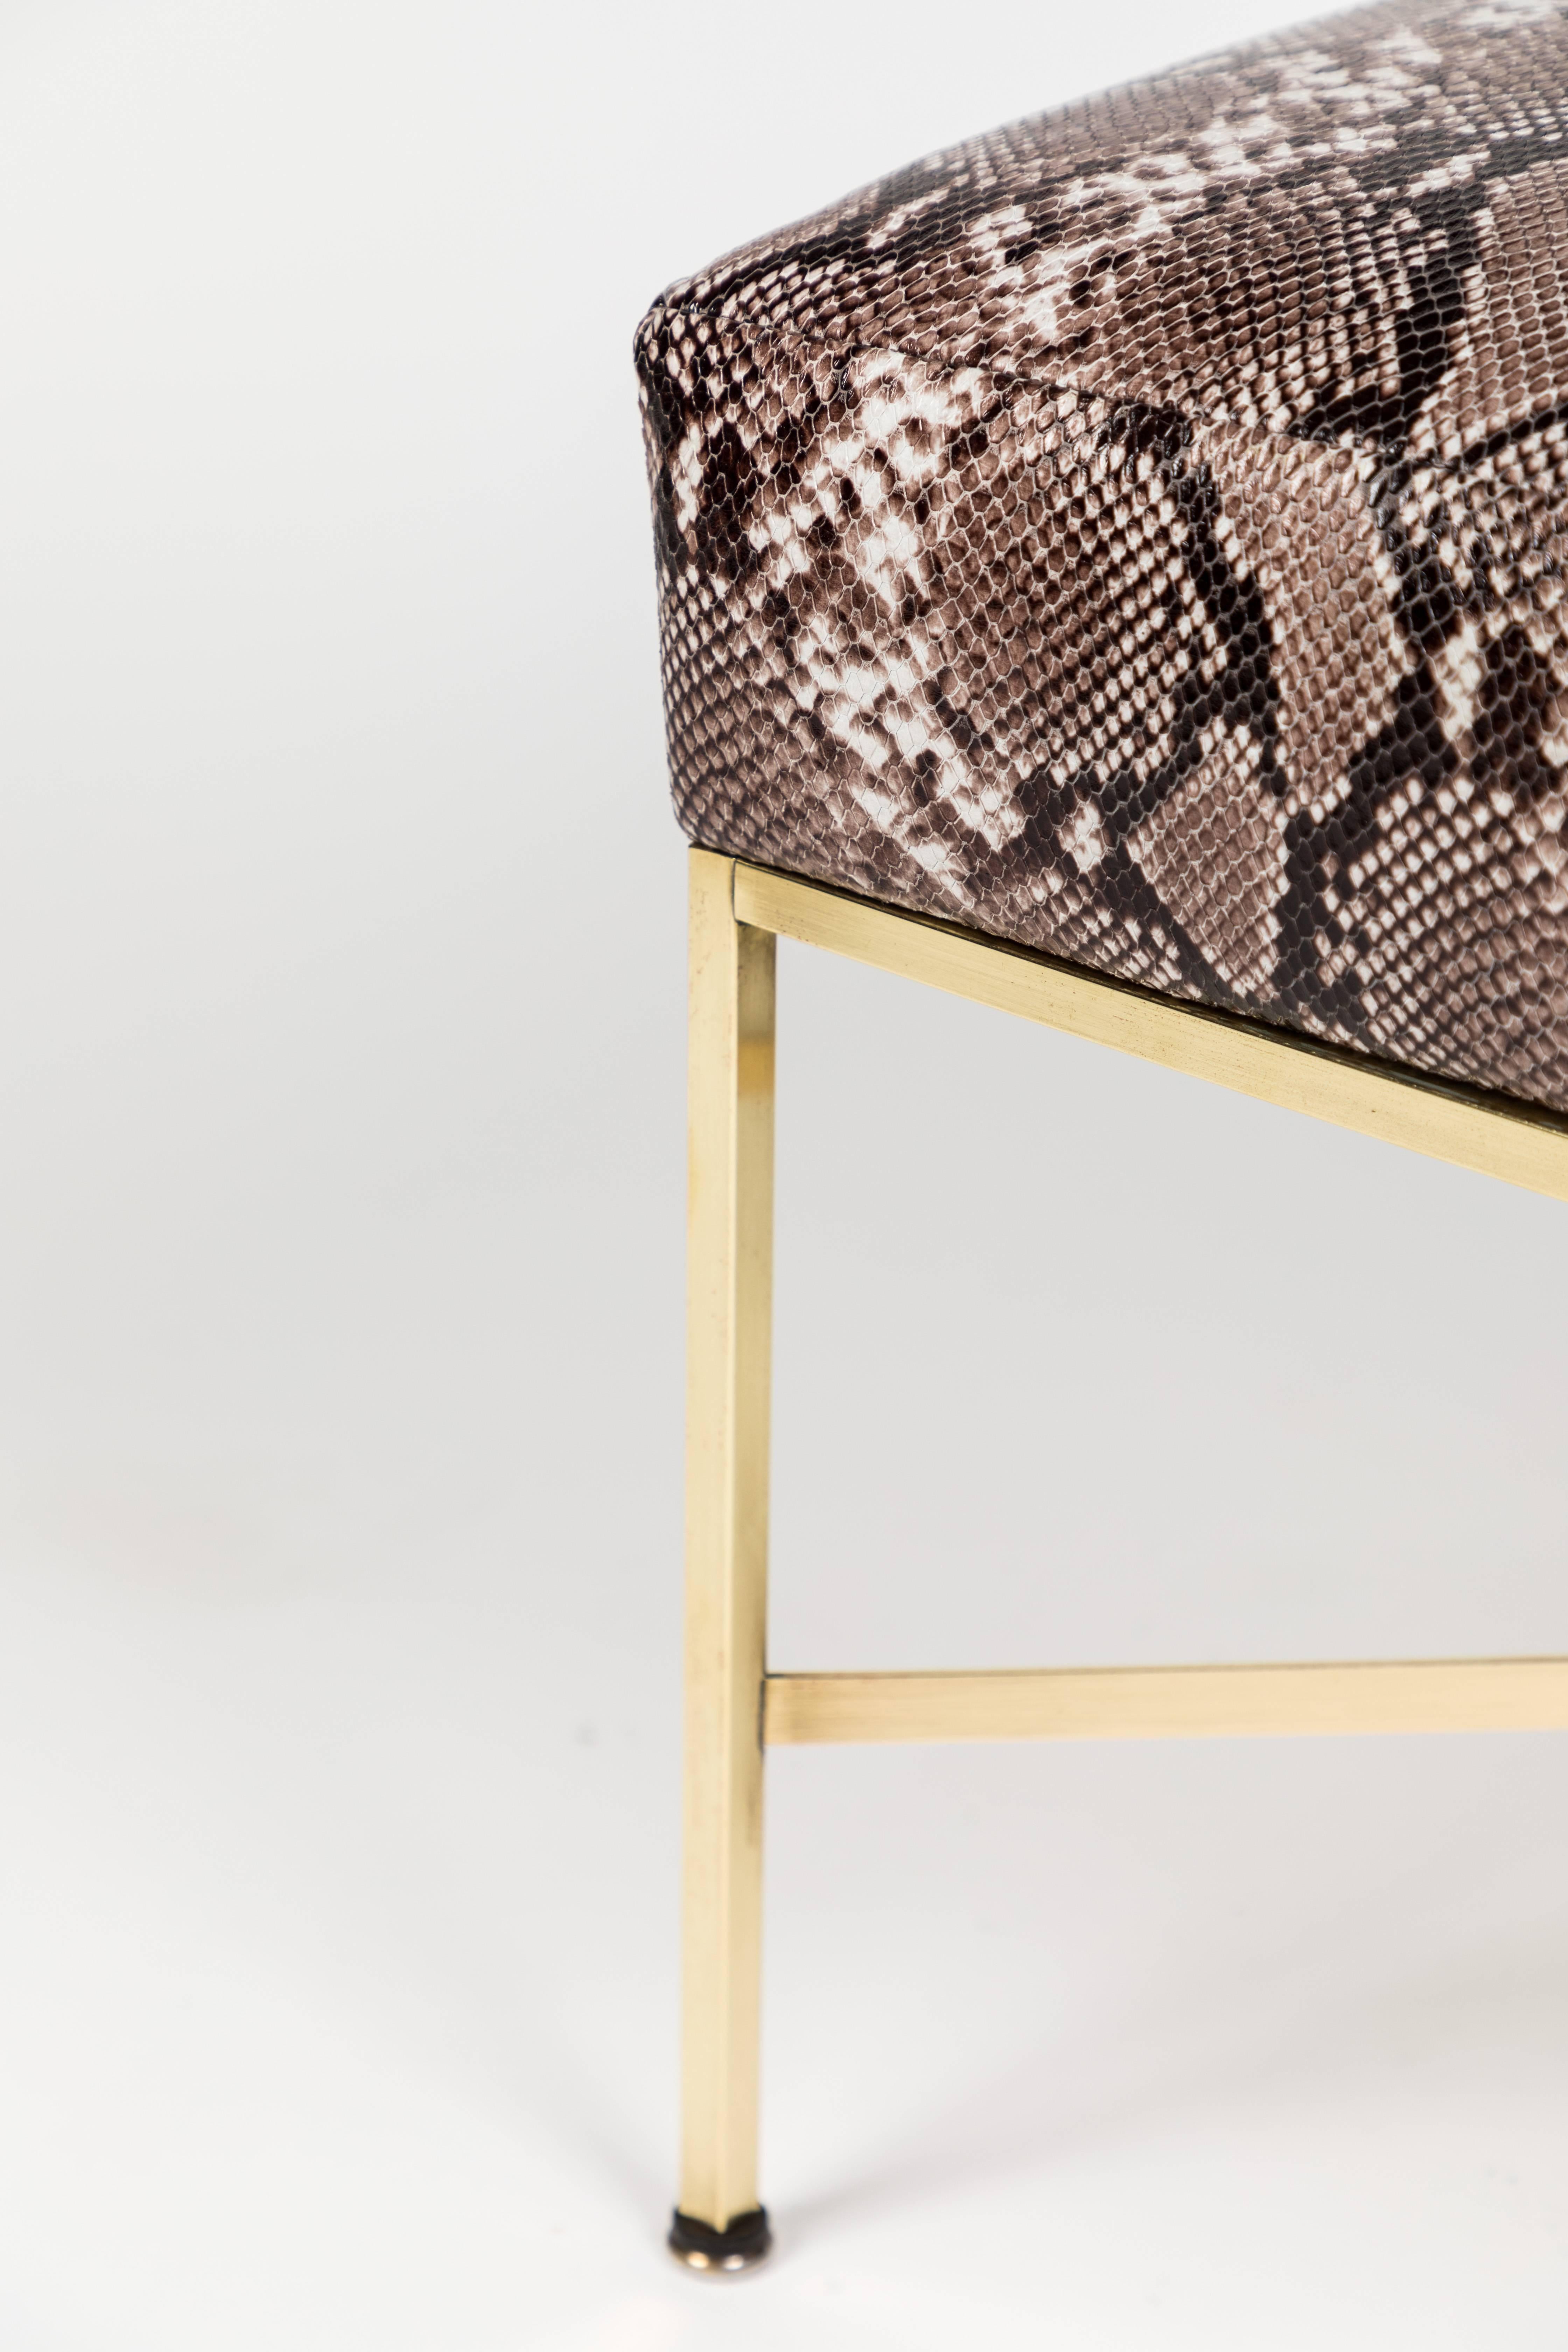 American Pair of Brass and Python-Printed Leather Stools by Paul McCobb